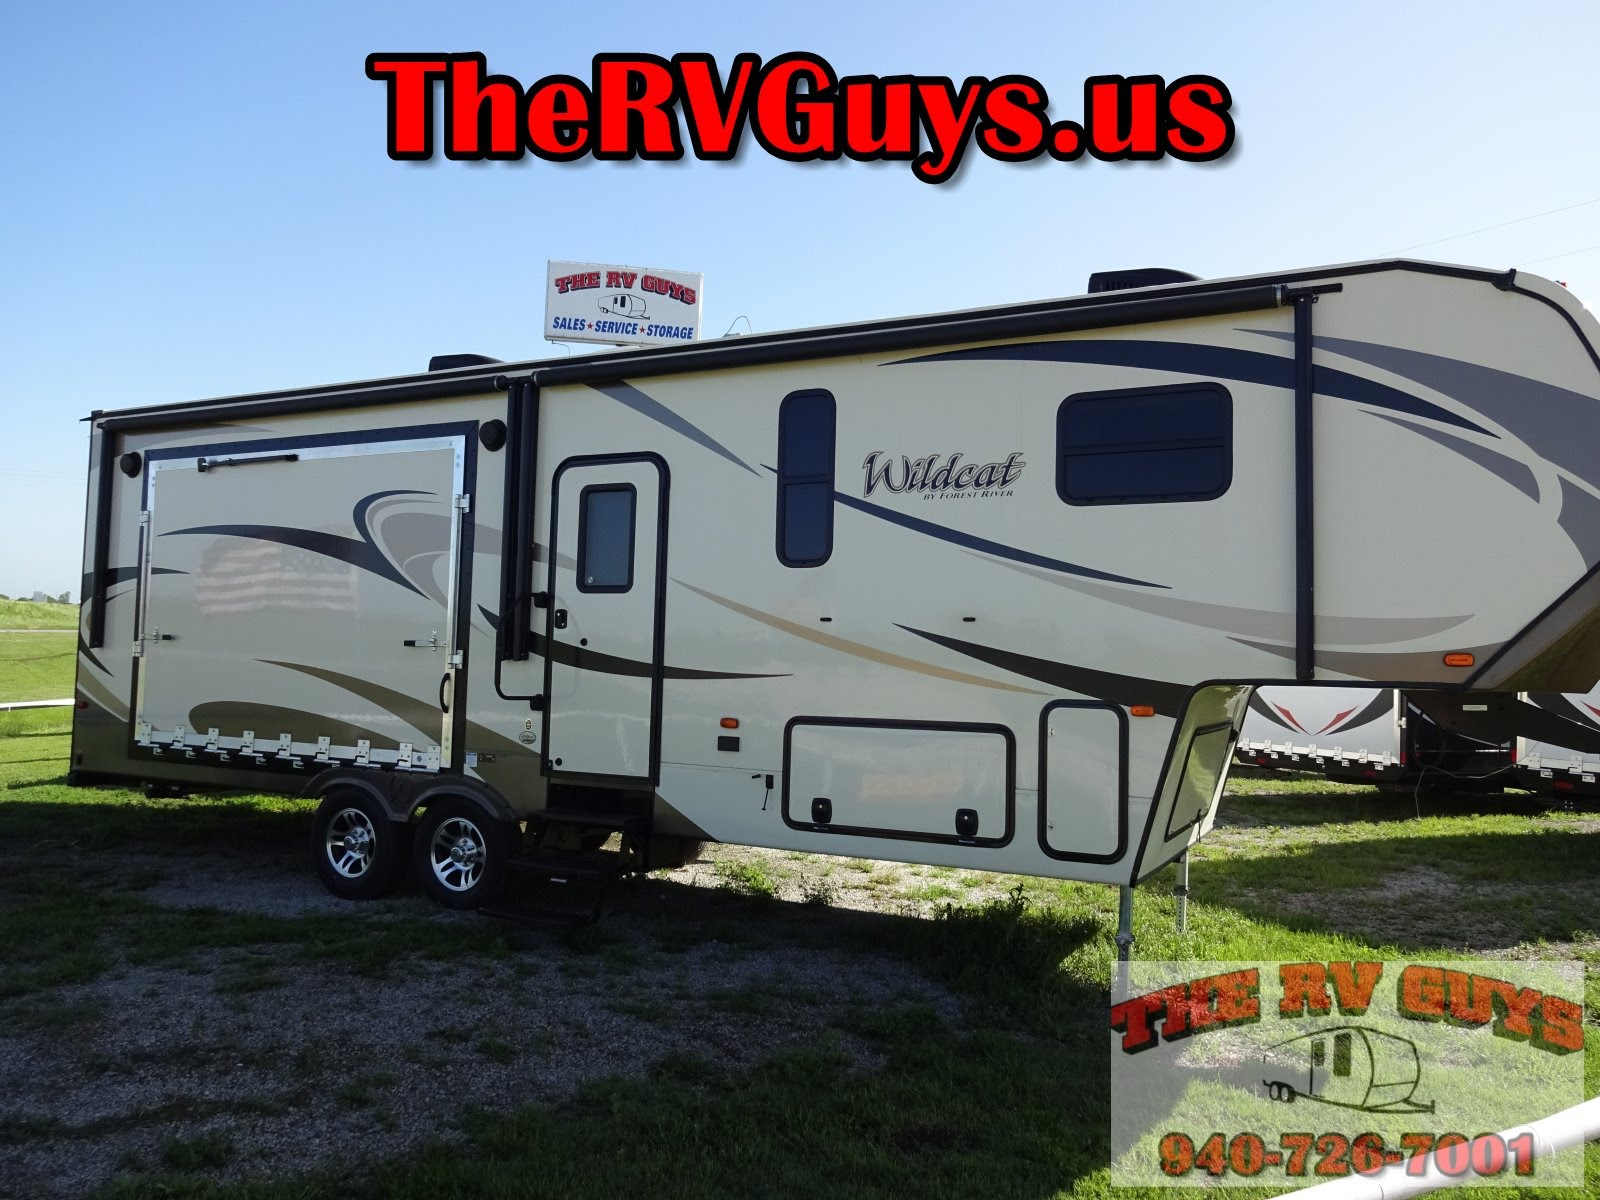 5th Wheel Rv With Patio Deck Patio Ideas in size 1600 X 1200